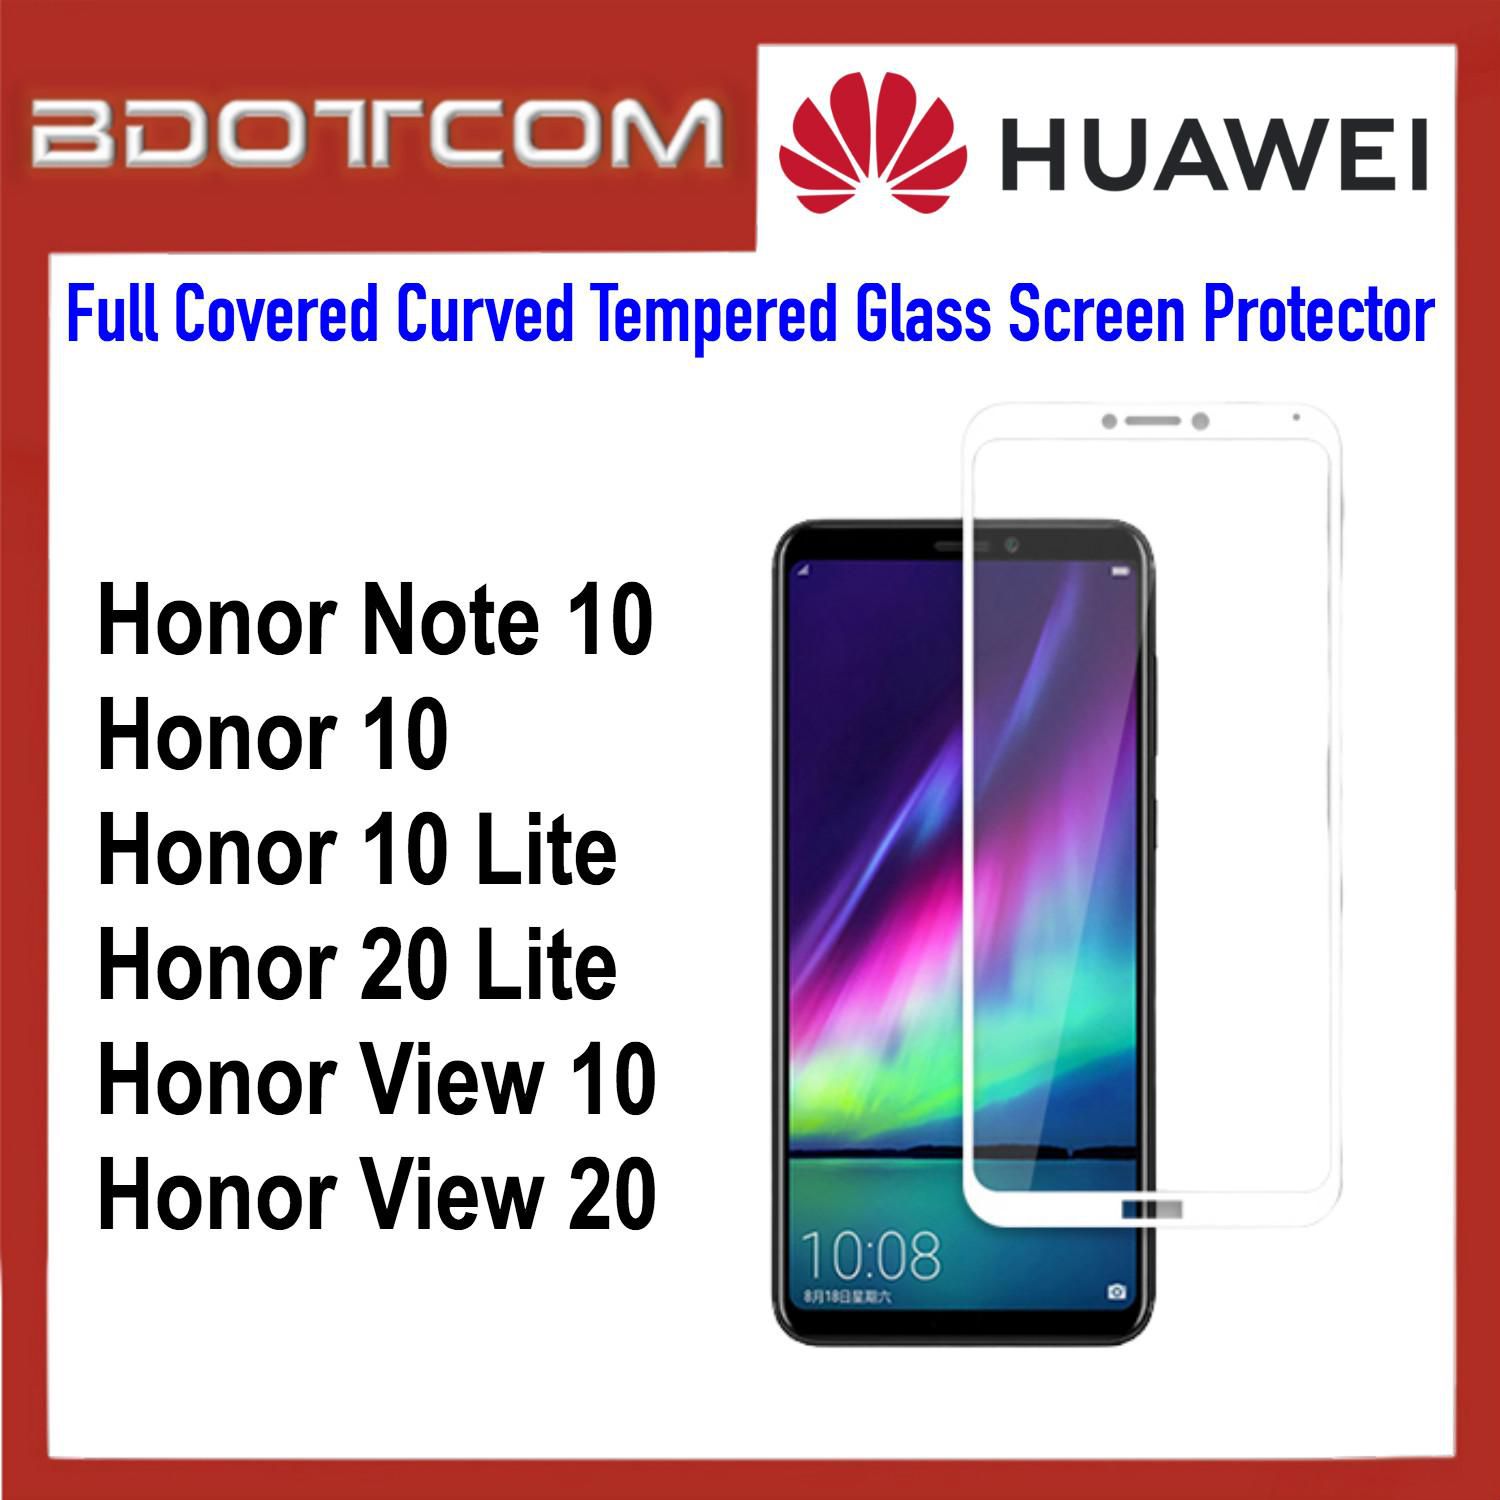 Bdotcom Full Covered Curved Glass Screen Protector for Huawei Honor Note 10 (White)